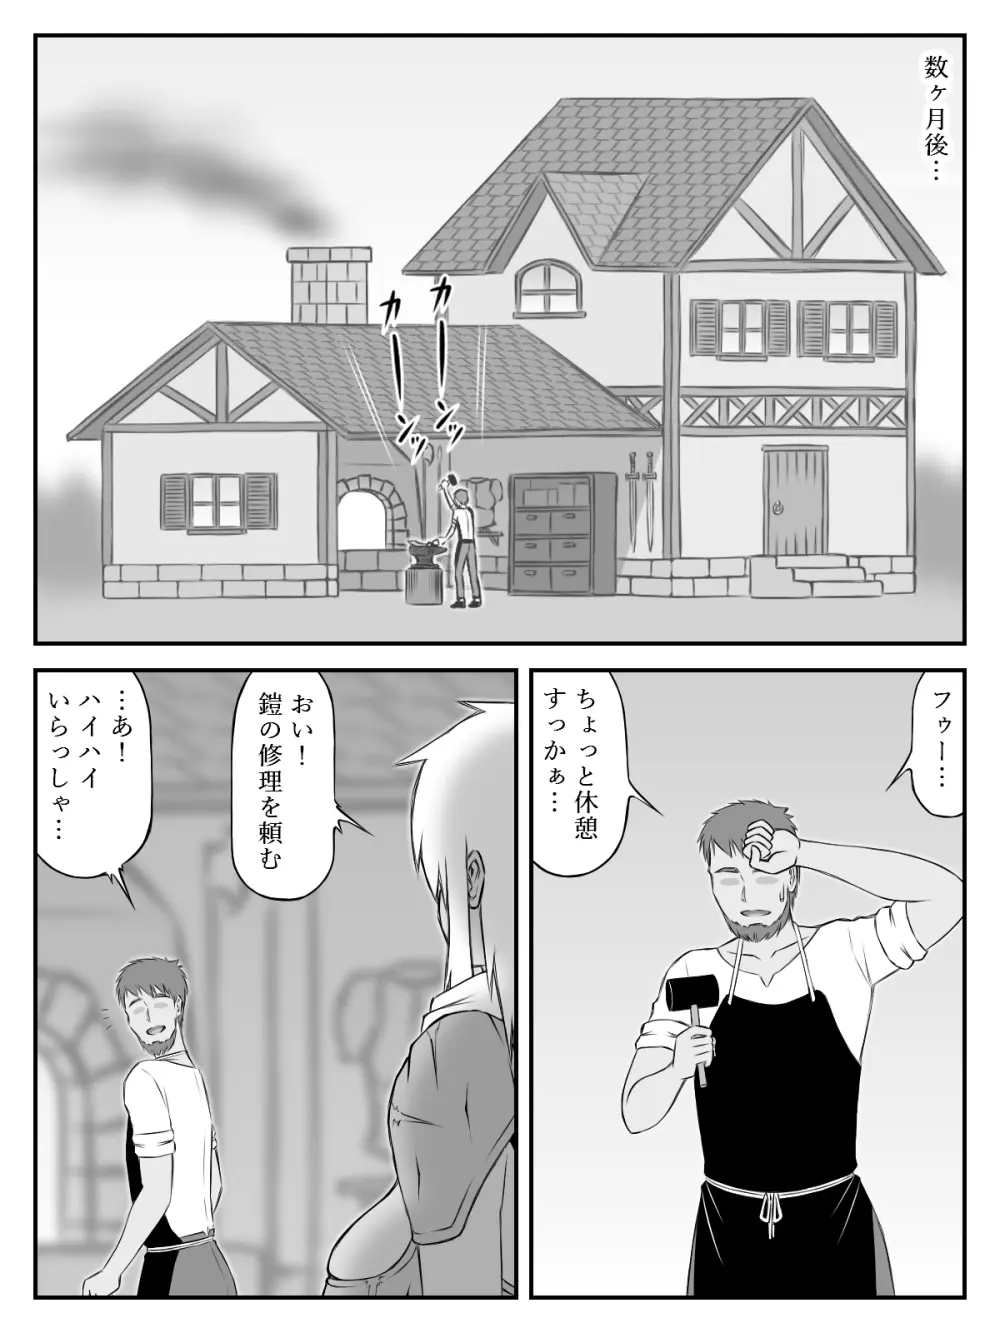 [SiD - Sato in Dreams -] 爆乳(おっぱい)と胸甲(アーマー) - page20